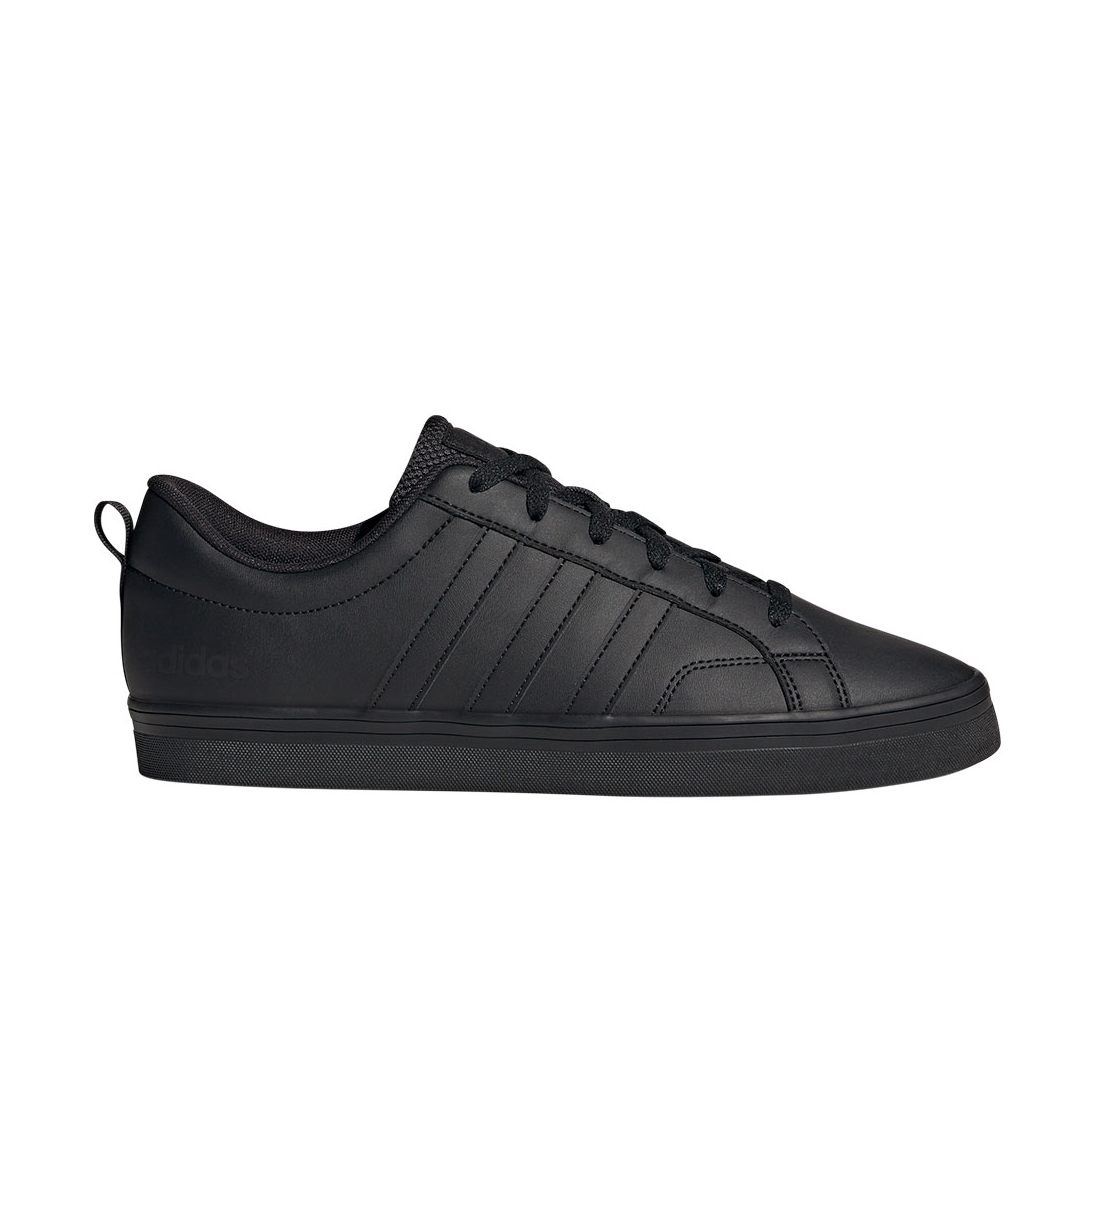 adidas Ανδρικό Παπούτσι Μόδας Ss22 Vs Pace 2.0 3-Stripes Branding Synthetic Nubuck Shoes Hp6008